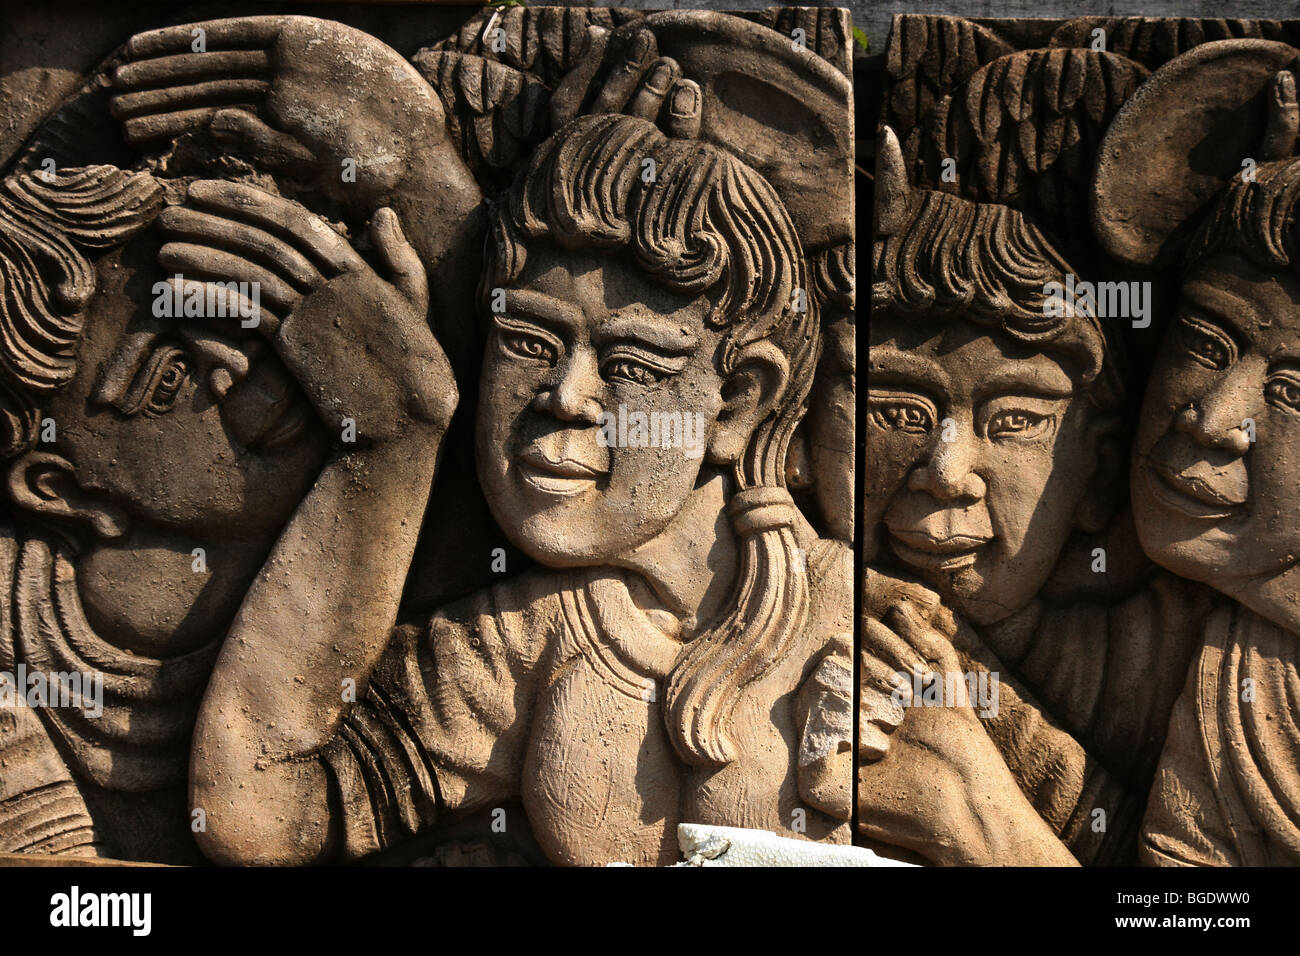 Thai ladies and men carved in stone for a garden, Thailand. Stock Photo